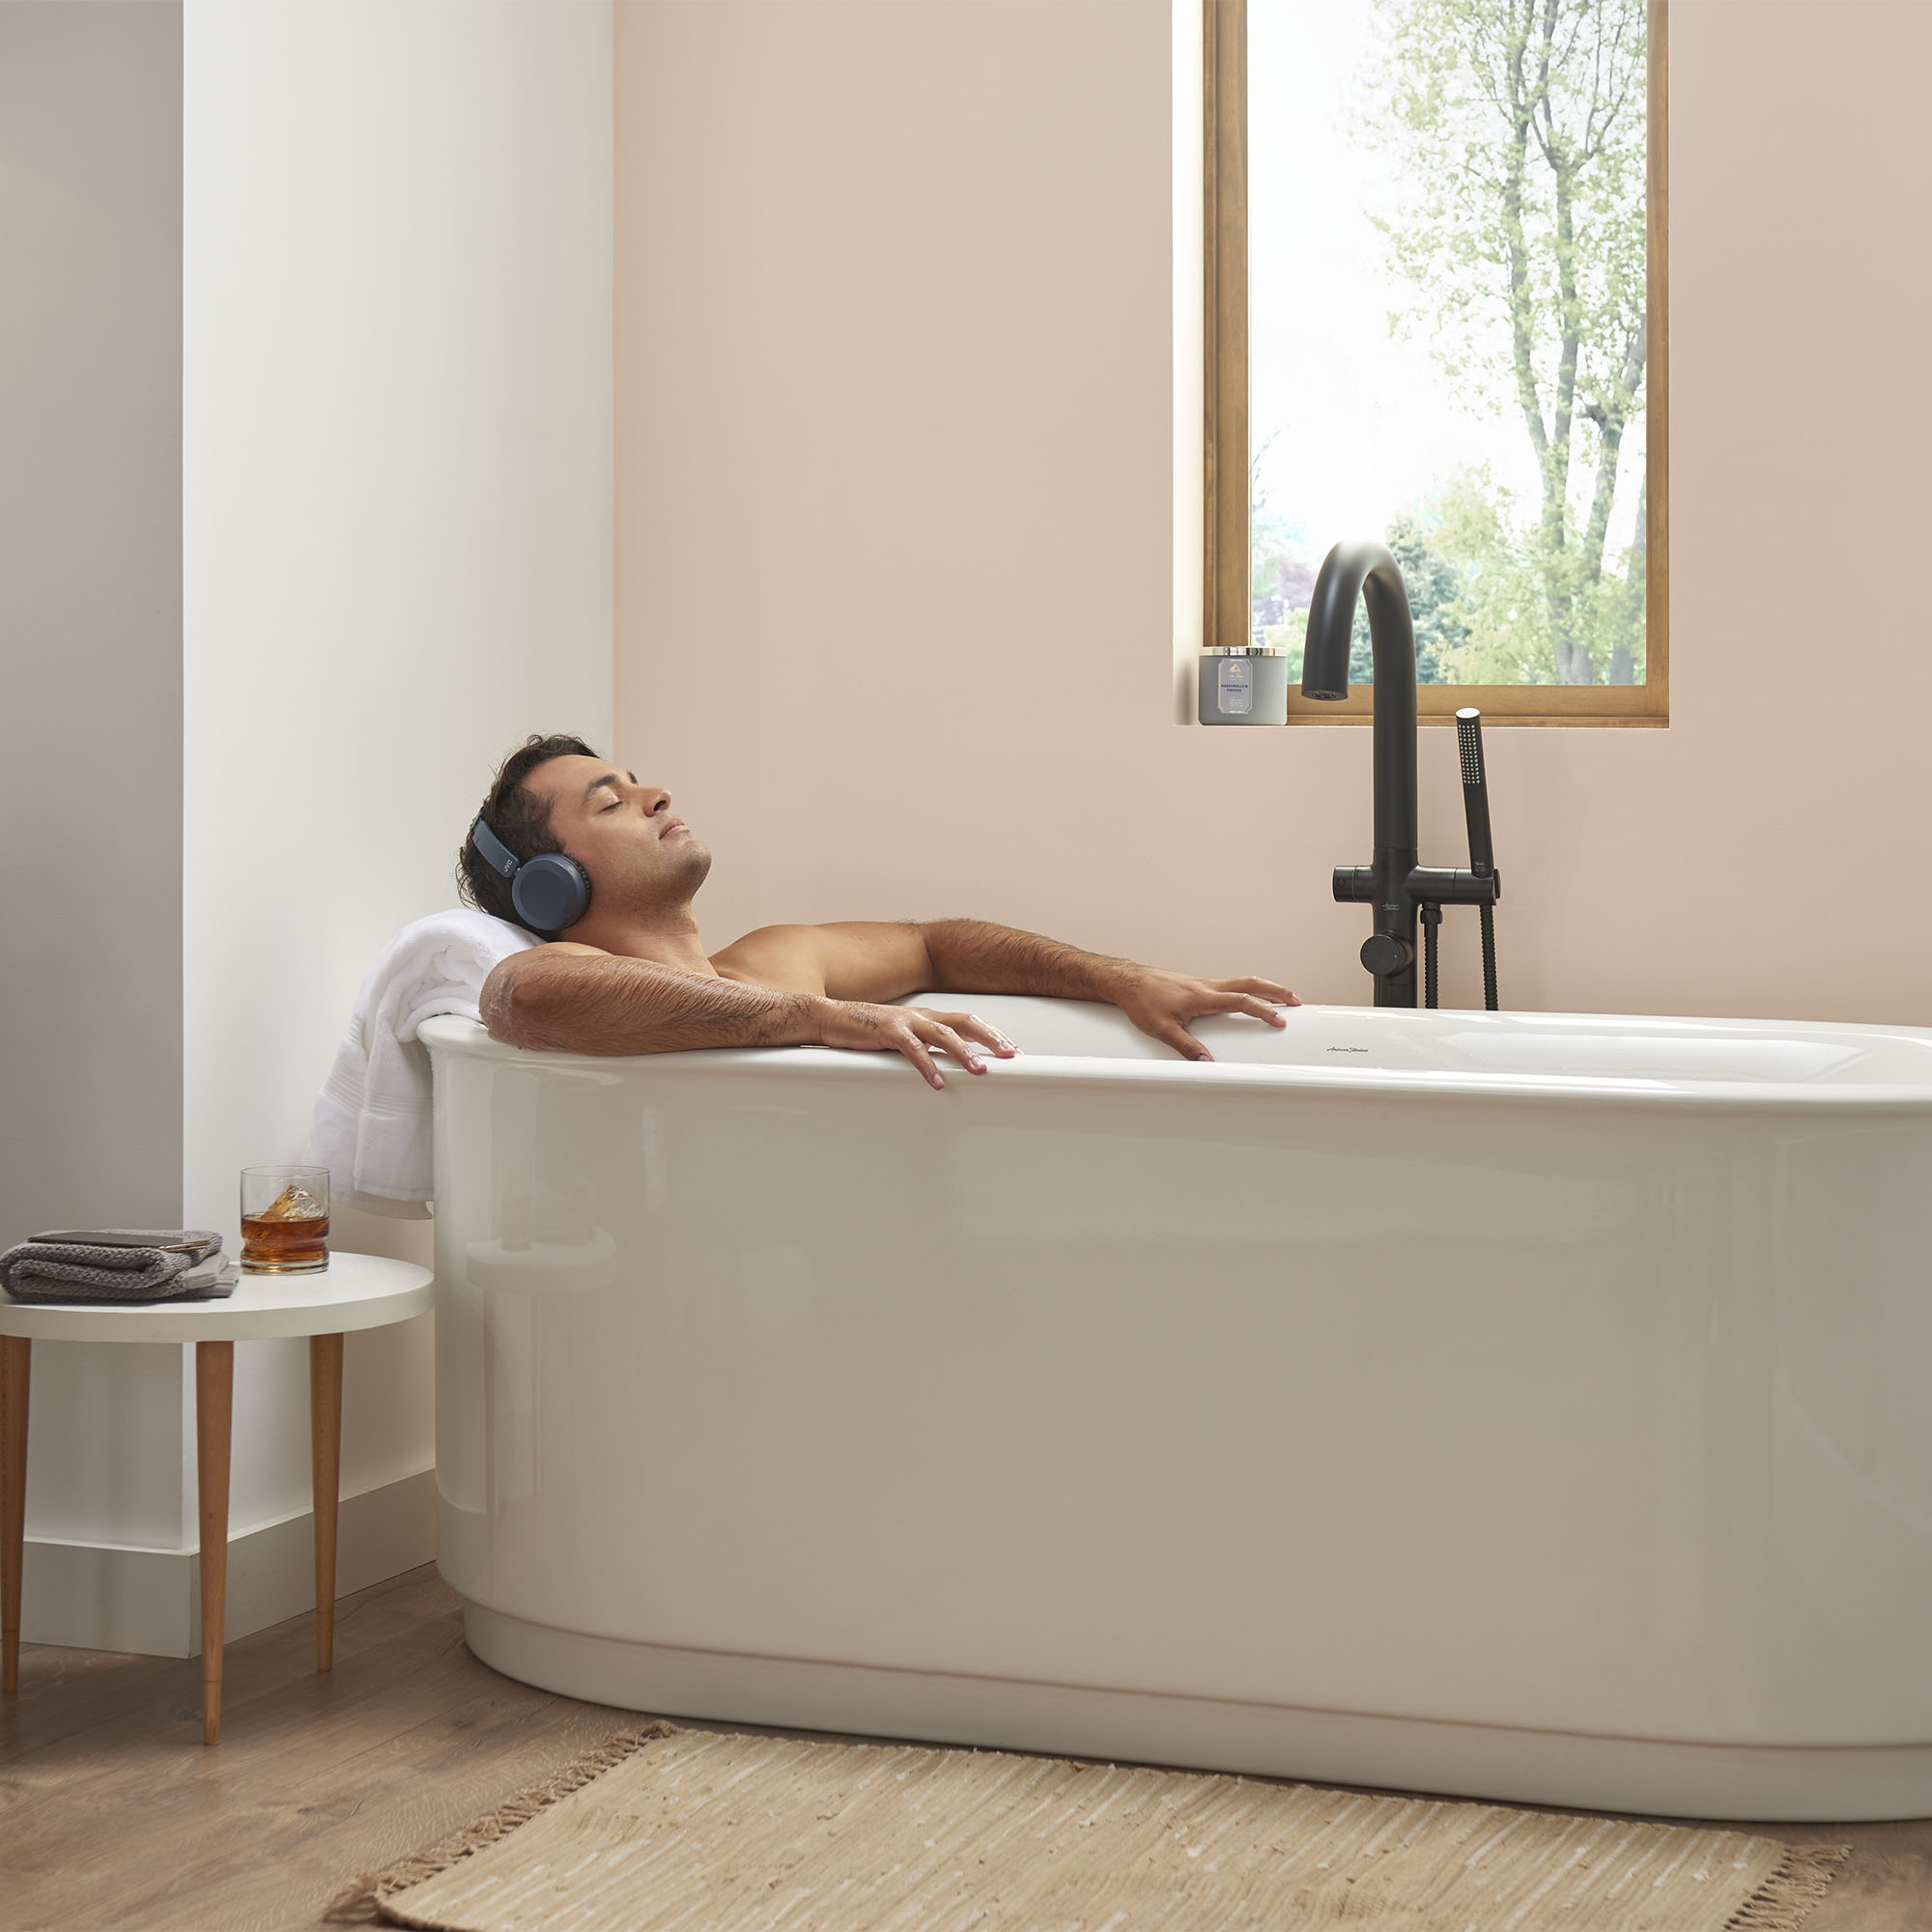 Contemporary Round Freestanding Bathtub With Lever Handle Faucet for Flash® Rough-In Valve